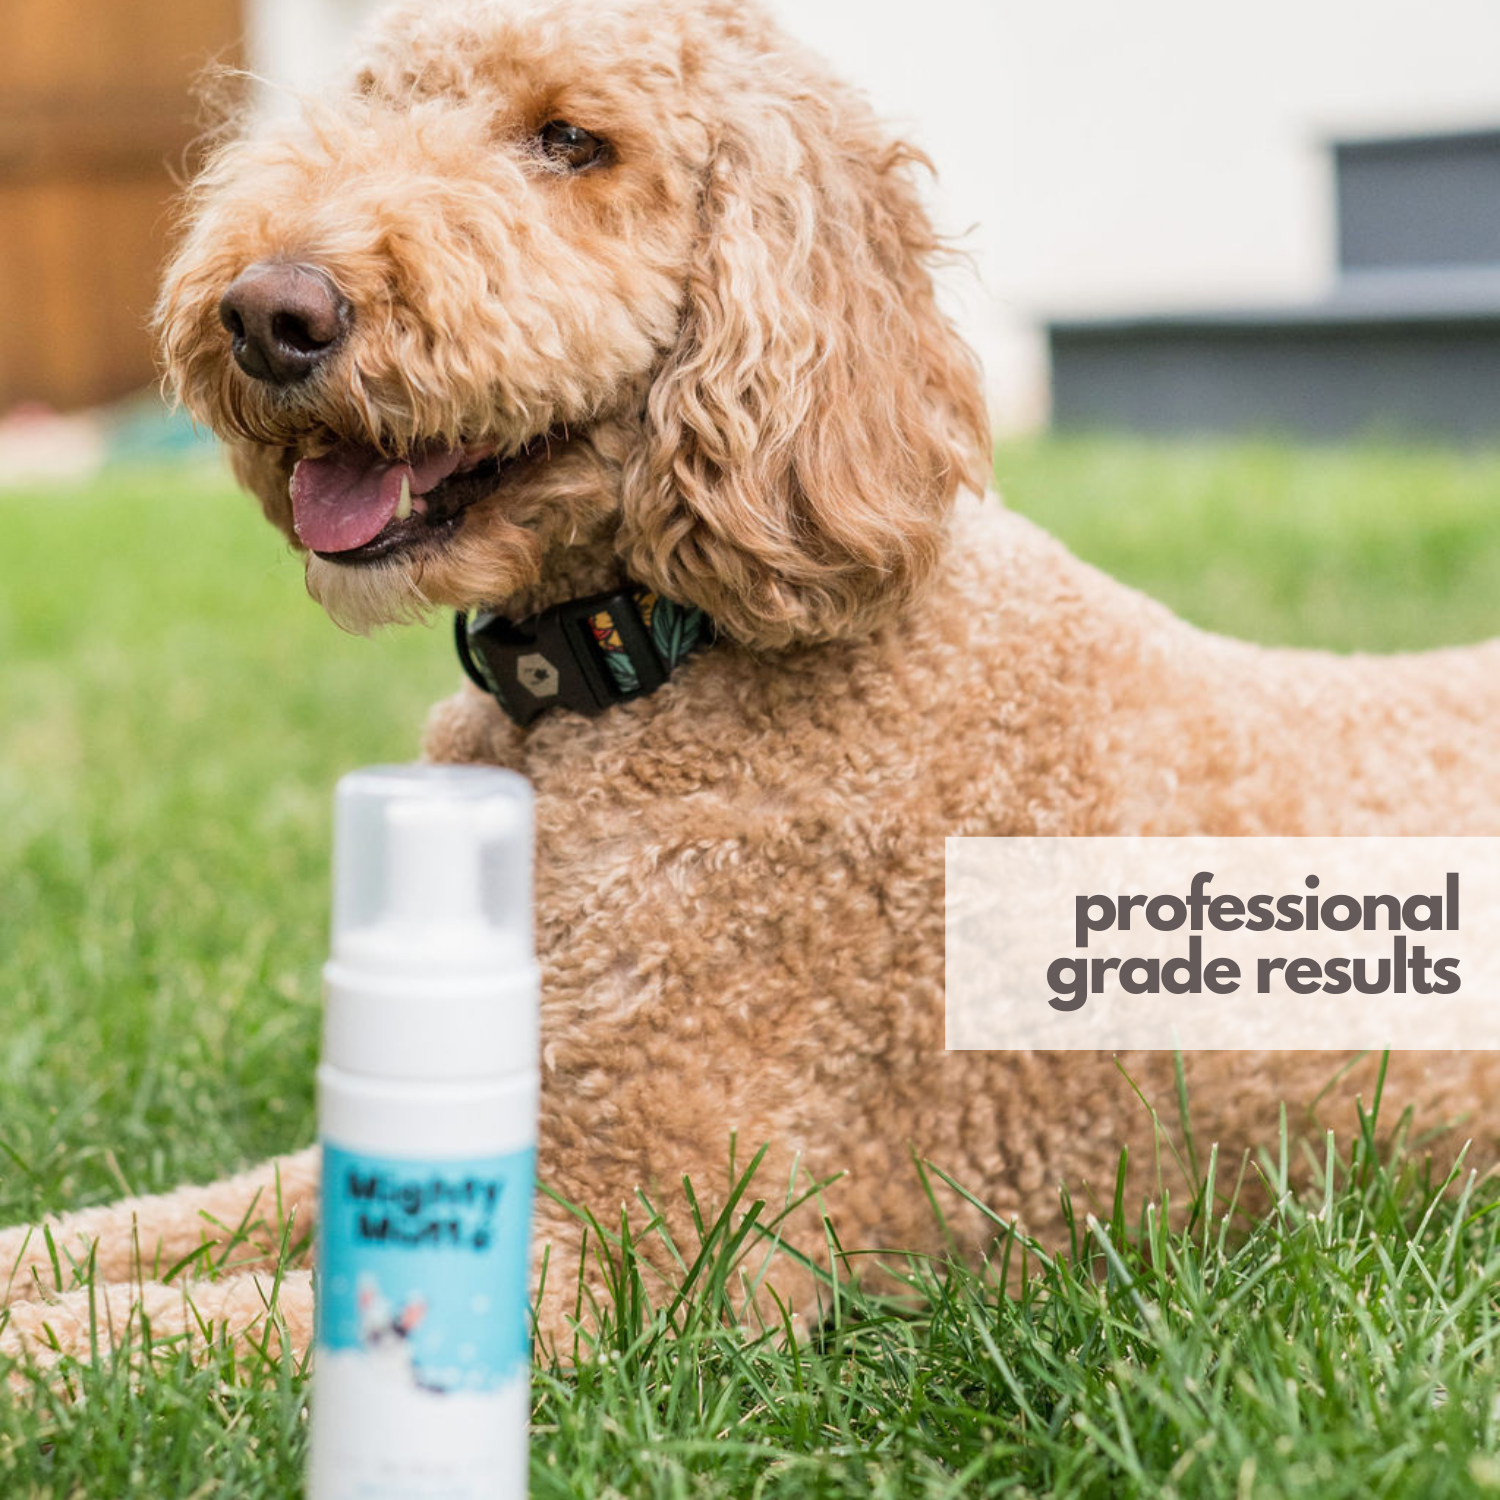 Spring Essentials For Dogs: 8 Must-Have Products - TMSAHM